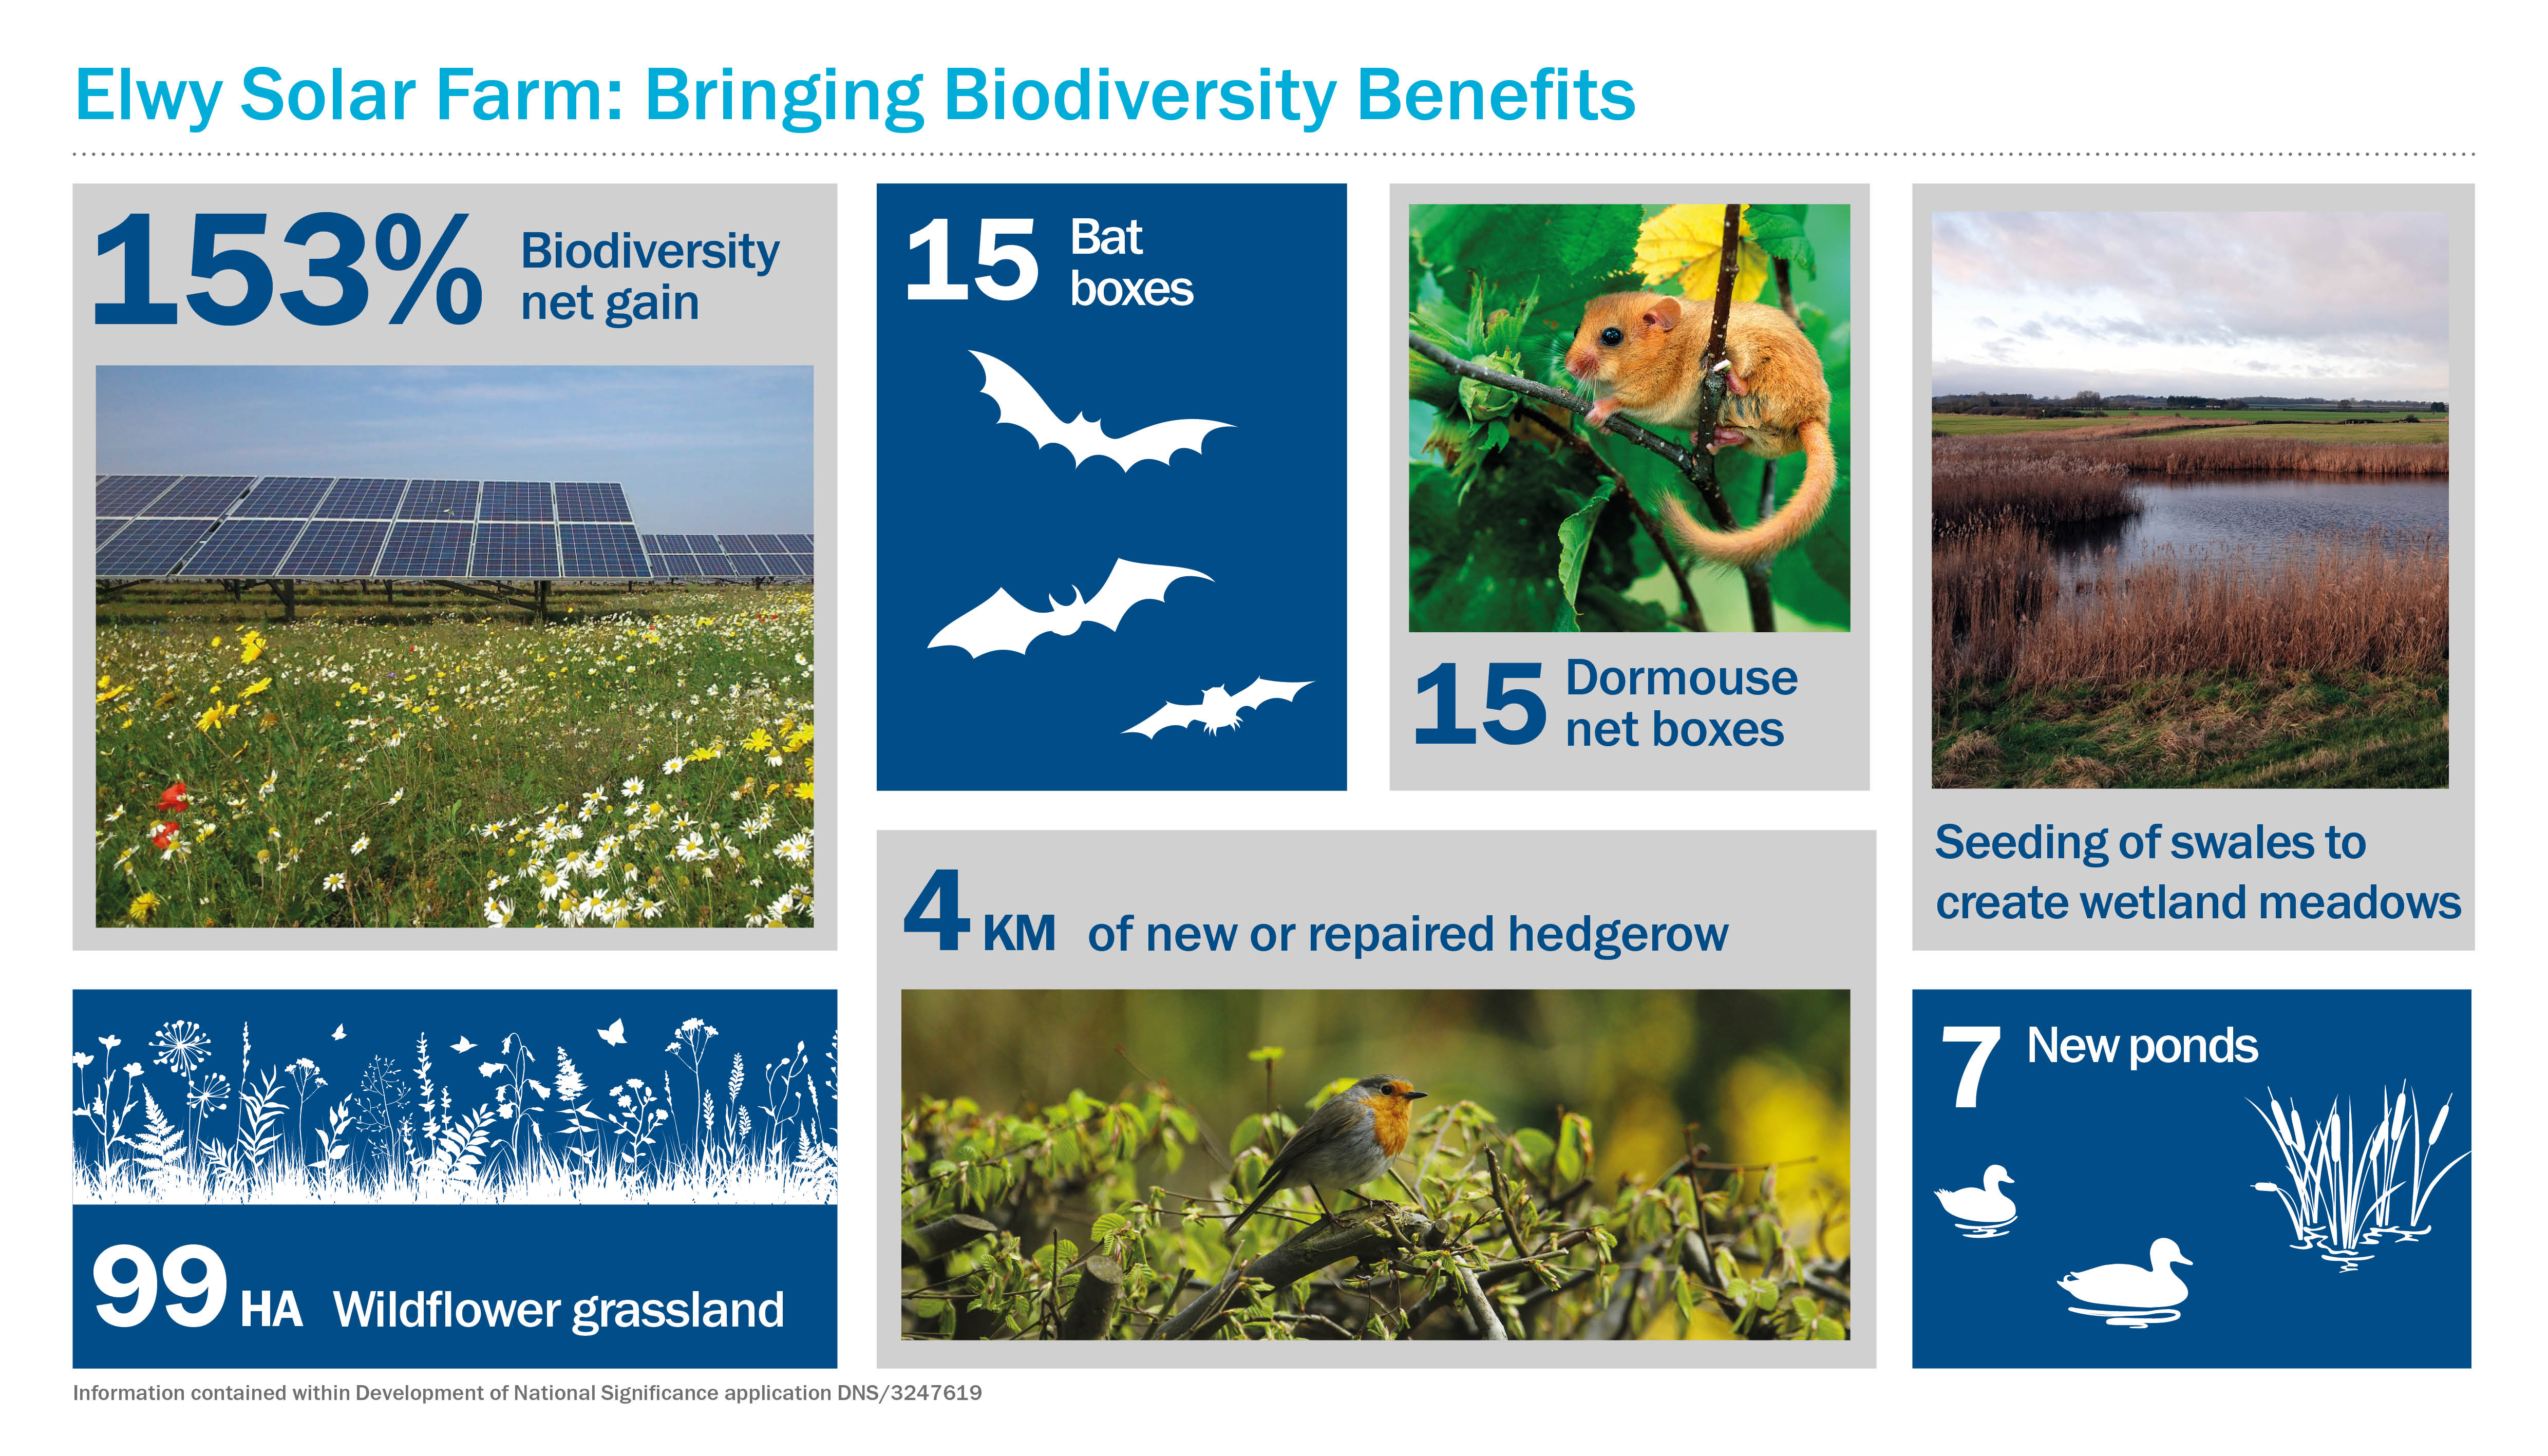 Graphic displaying key biodiversity enhancements of the project: 99HA of wildflower grassland, 4km of new or repaired hedgerows, 15 dormouse nest boxes, 15 bat boxes, 7 new ponds and seeding of drainage swales to create wetland meadows. 